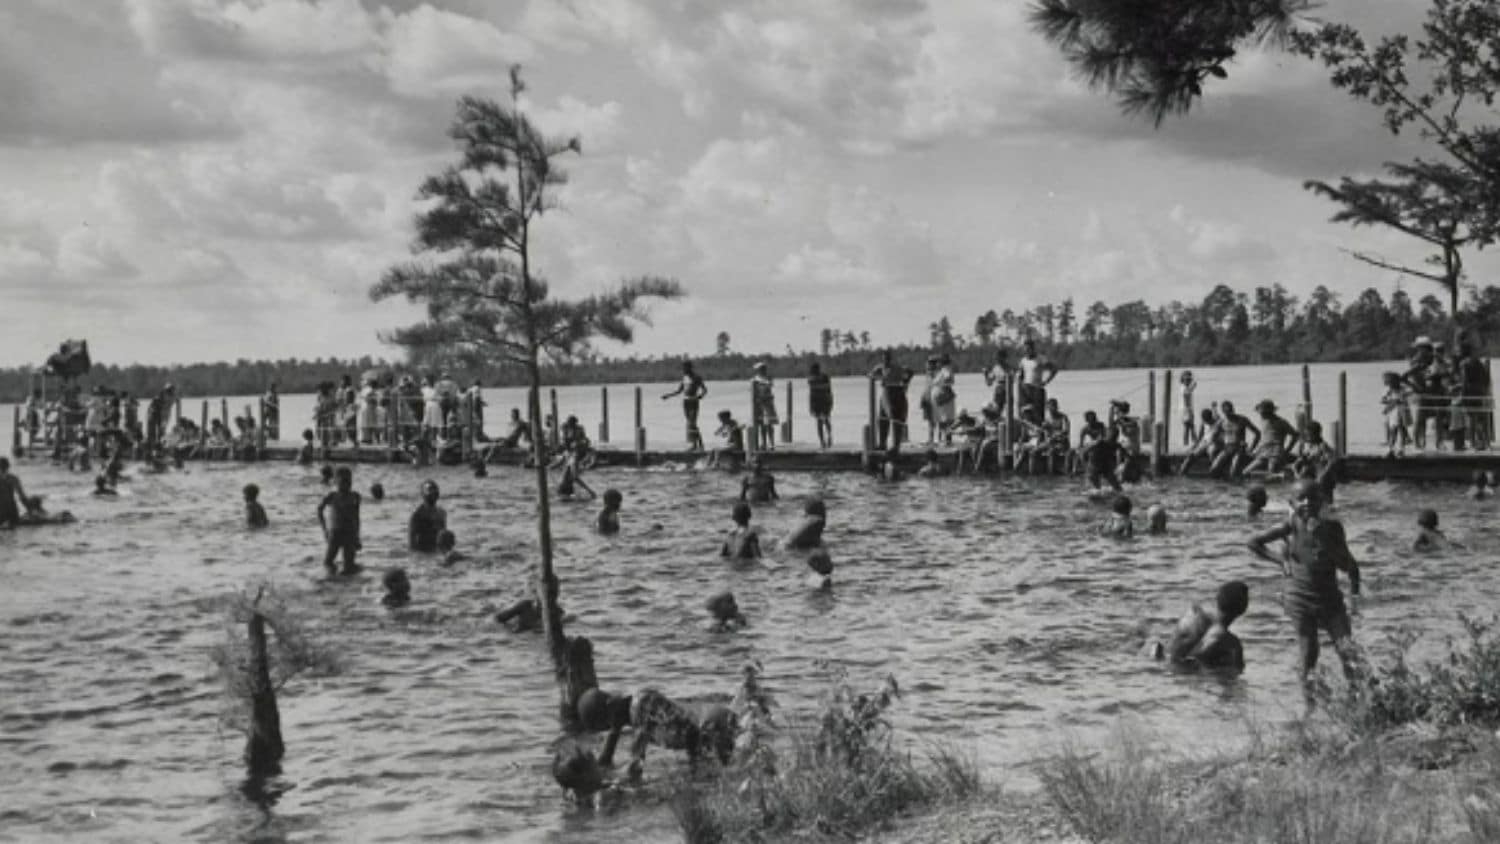 Jones Lake State Park, circa 1940s - Tracking Injustice in the History of U.S. Public Parks - College of Natural Resources at NC State University